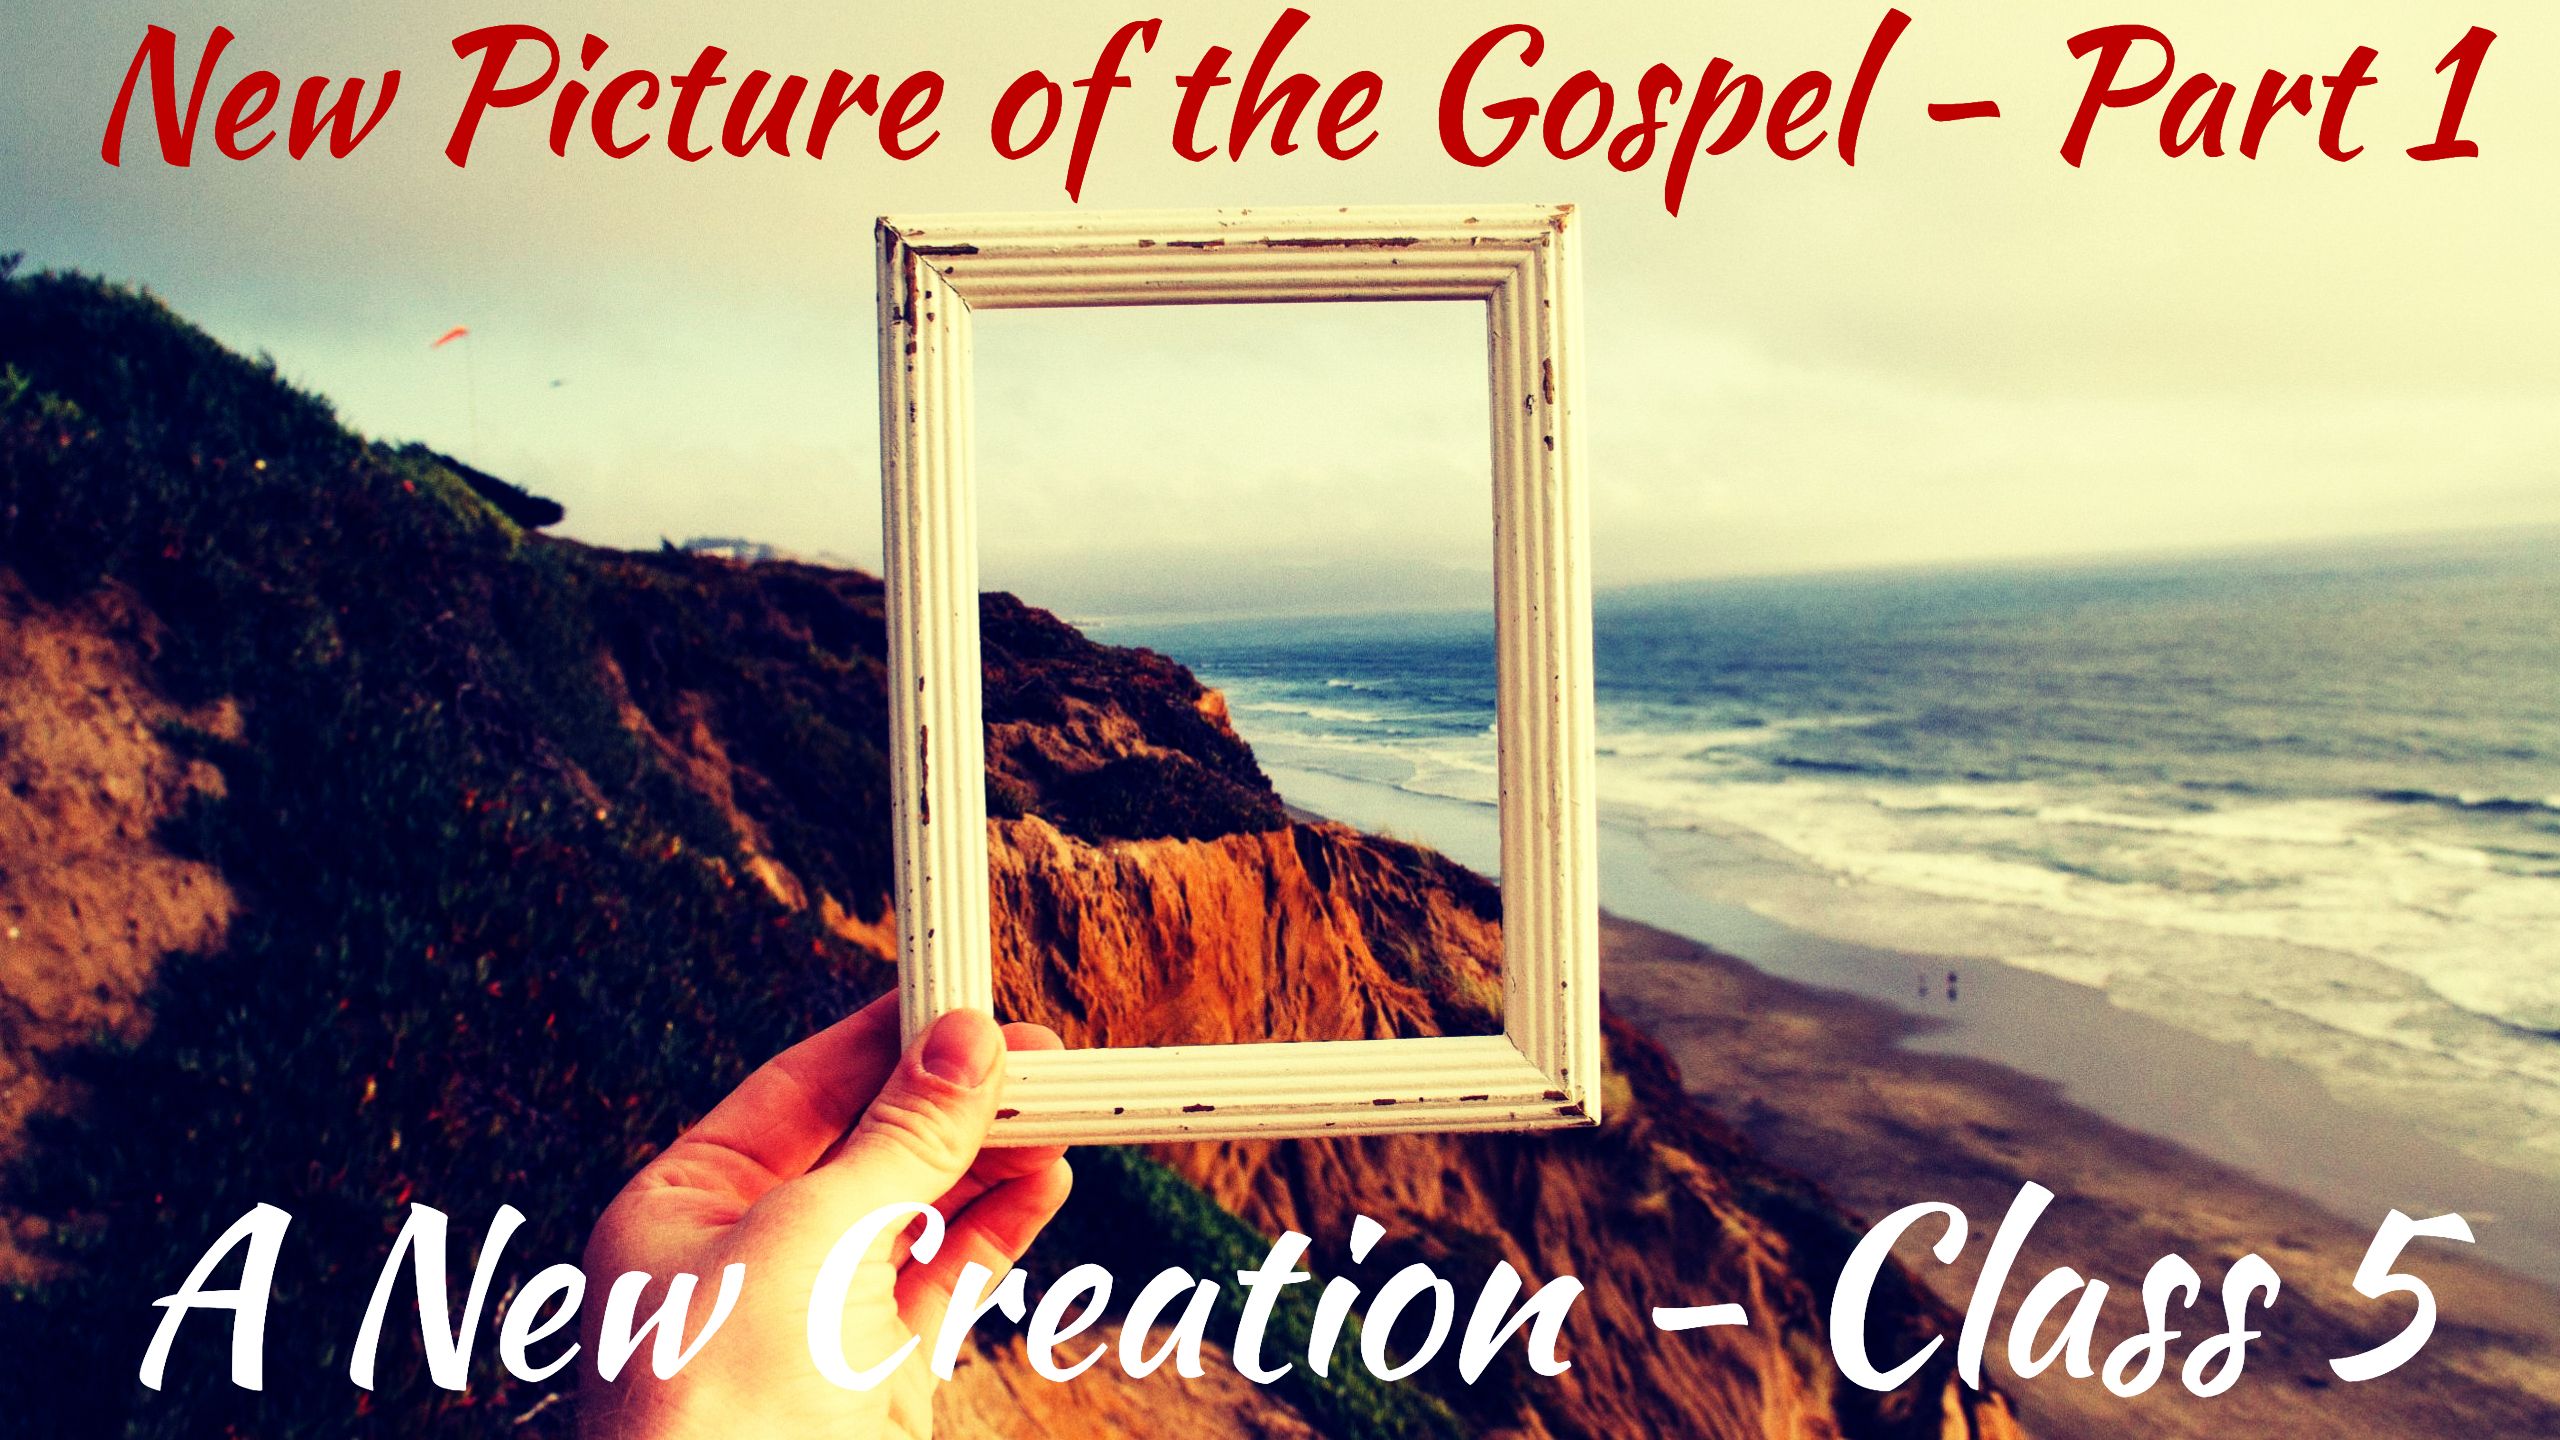 S2 Ep2192: A New Creation | Class 5 - ”New Picture of the Gospel - Part 1” | Malcolm Cox